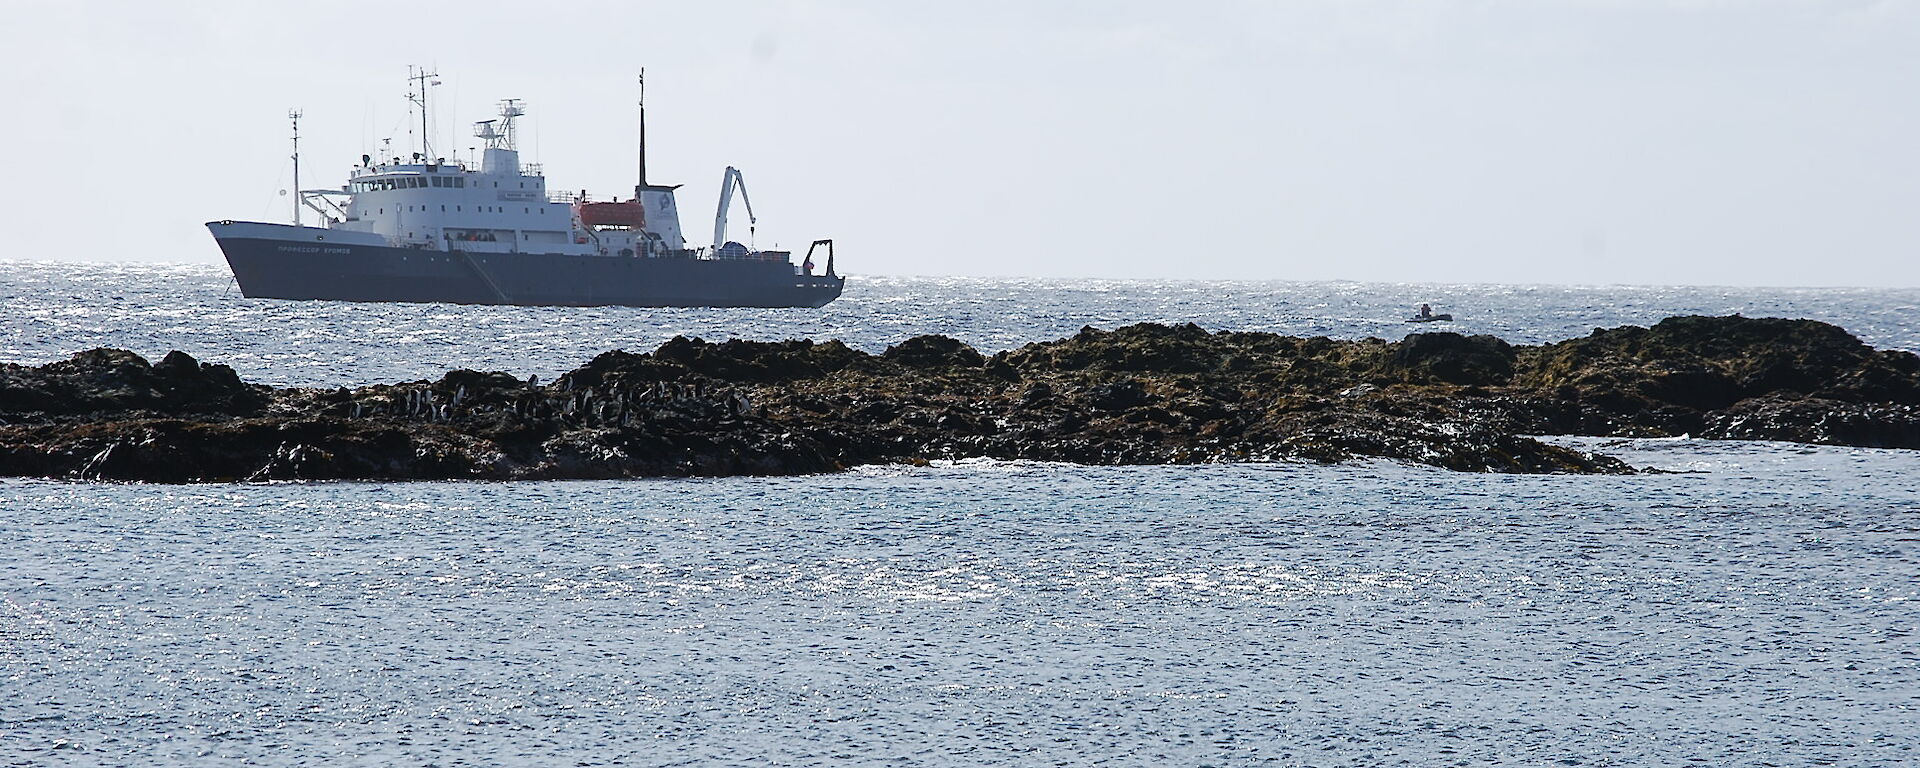 Spirit of Enderby off Sandy Bay. There is a exposed rocky outcrop in the mid-forground and one of the ships IRB’s can be seen making its way across the water